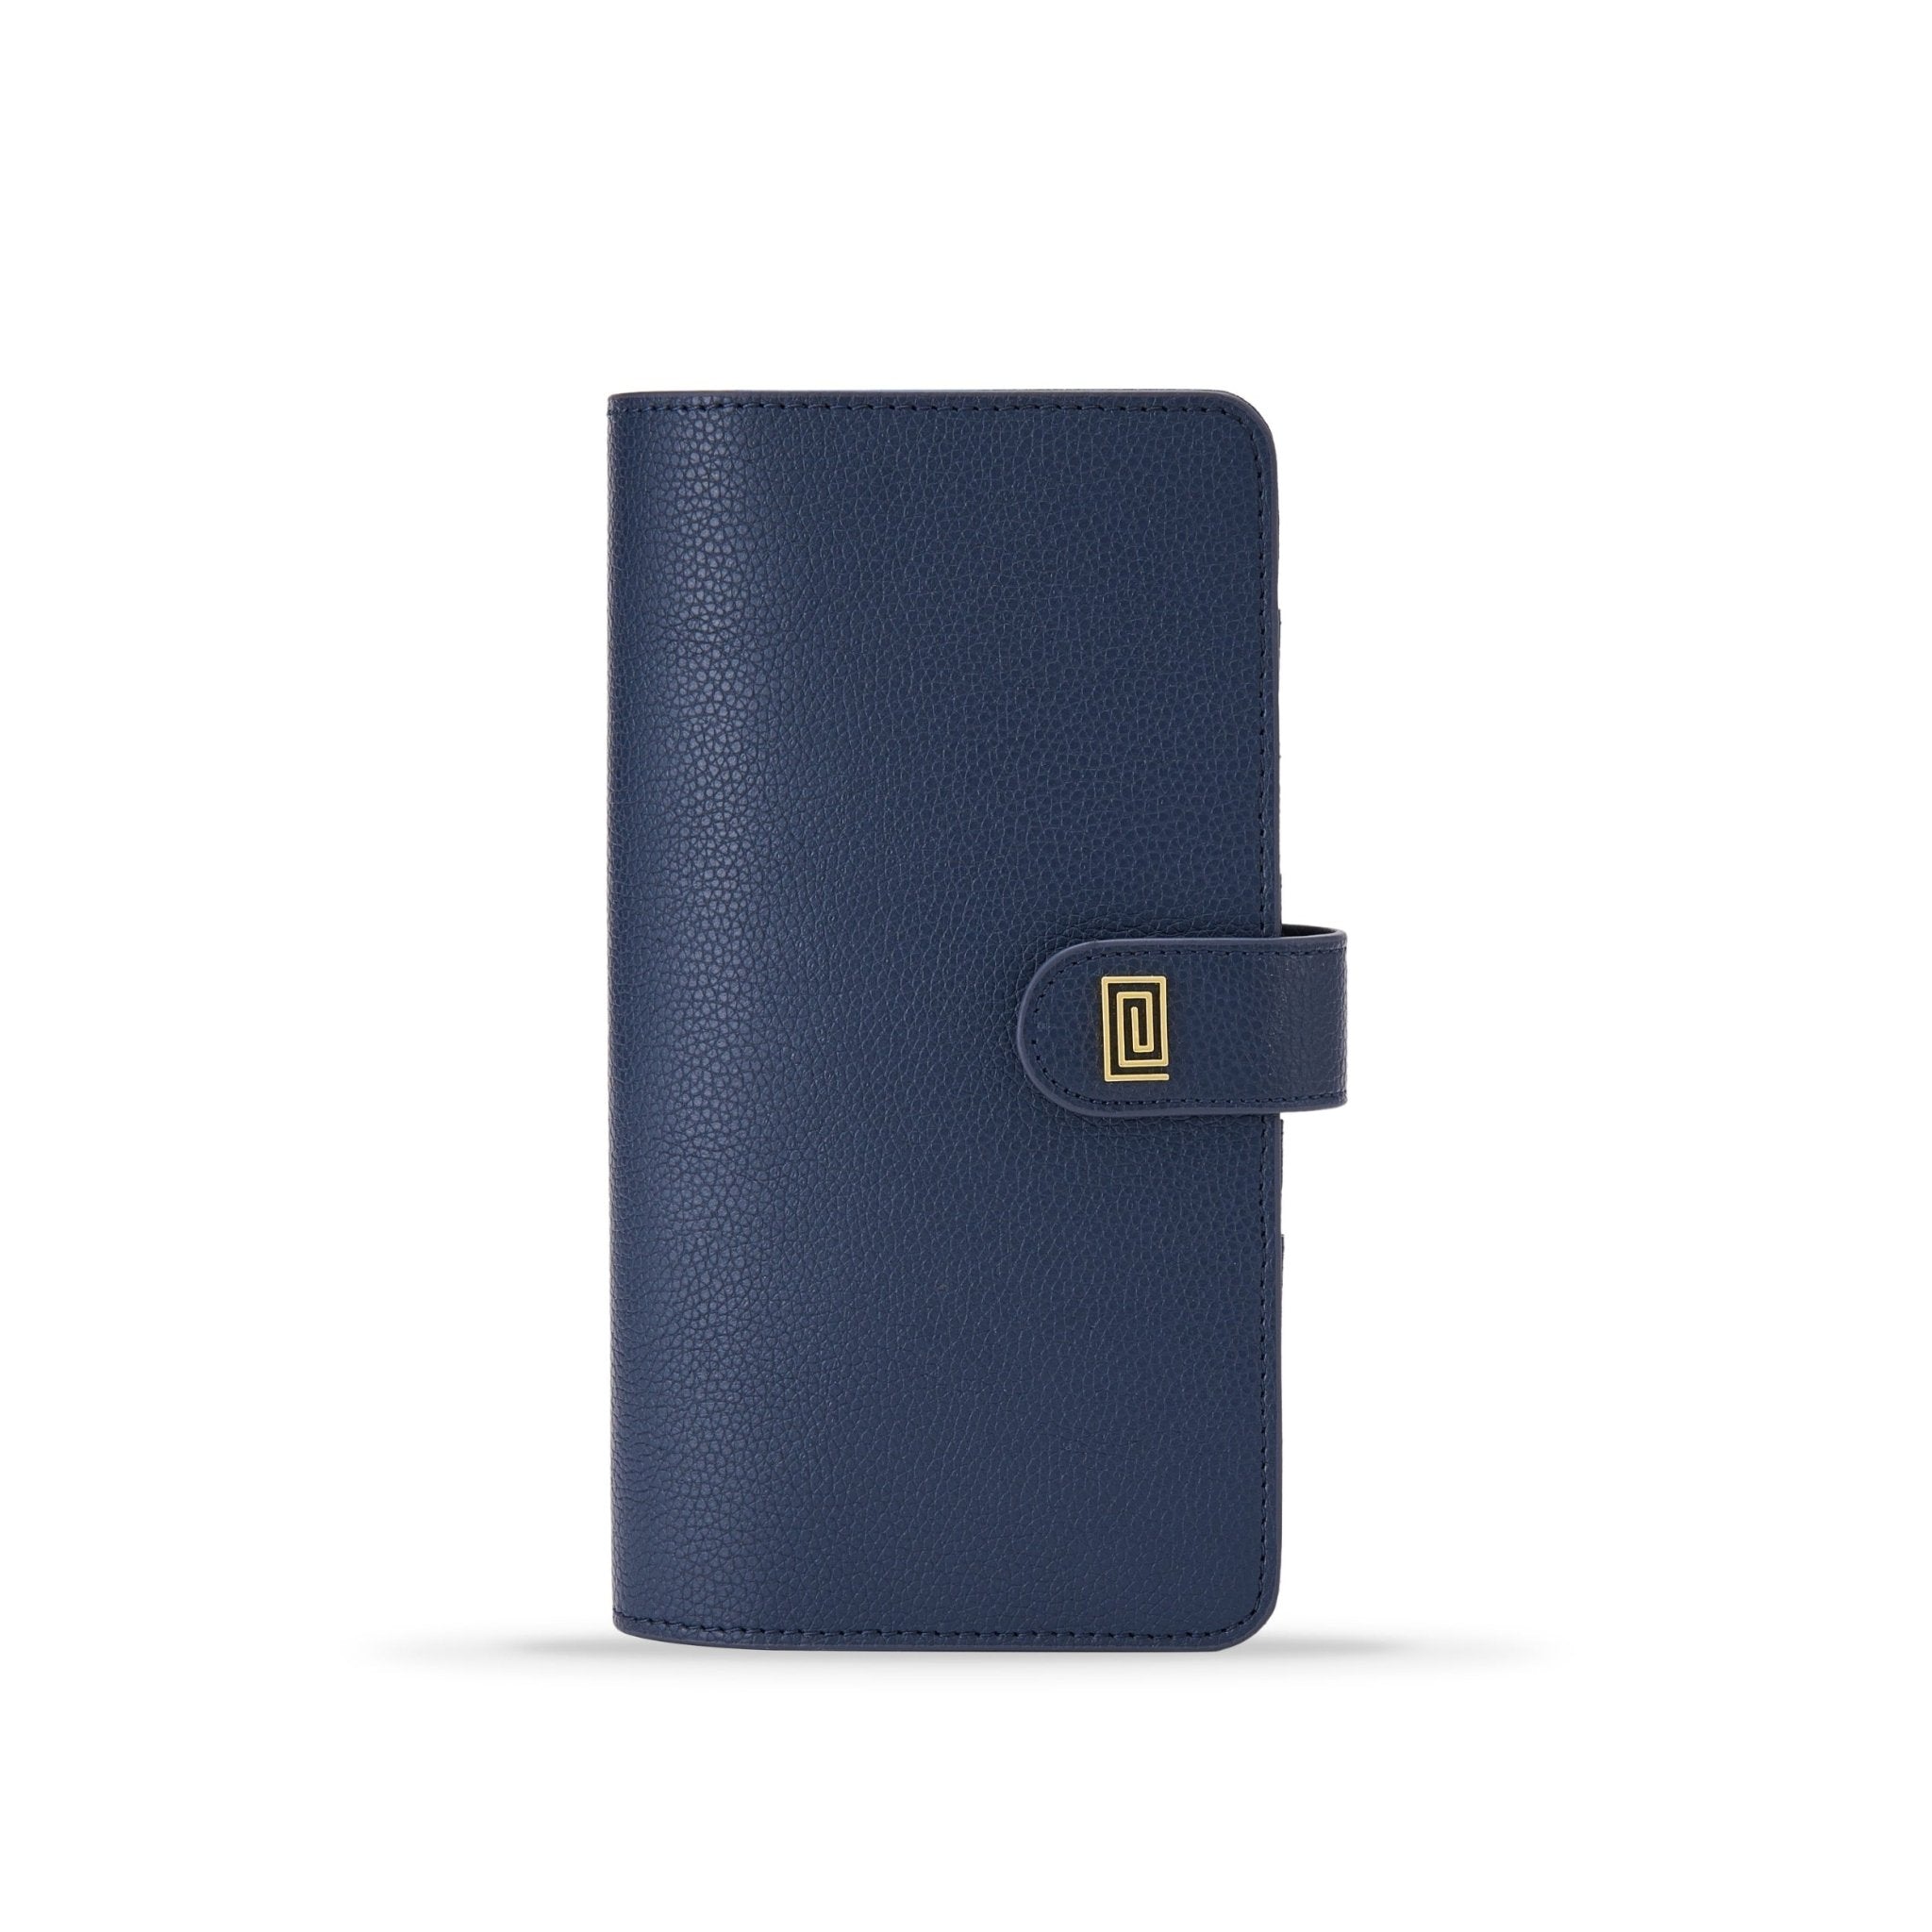 Navy Pro Pebble Slim Compact | OUTLET | SL5. Slim Compact Wallet Ringless Agenda | Wallet Planner Cover | Final Sale | NOTIQ